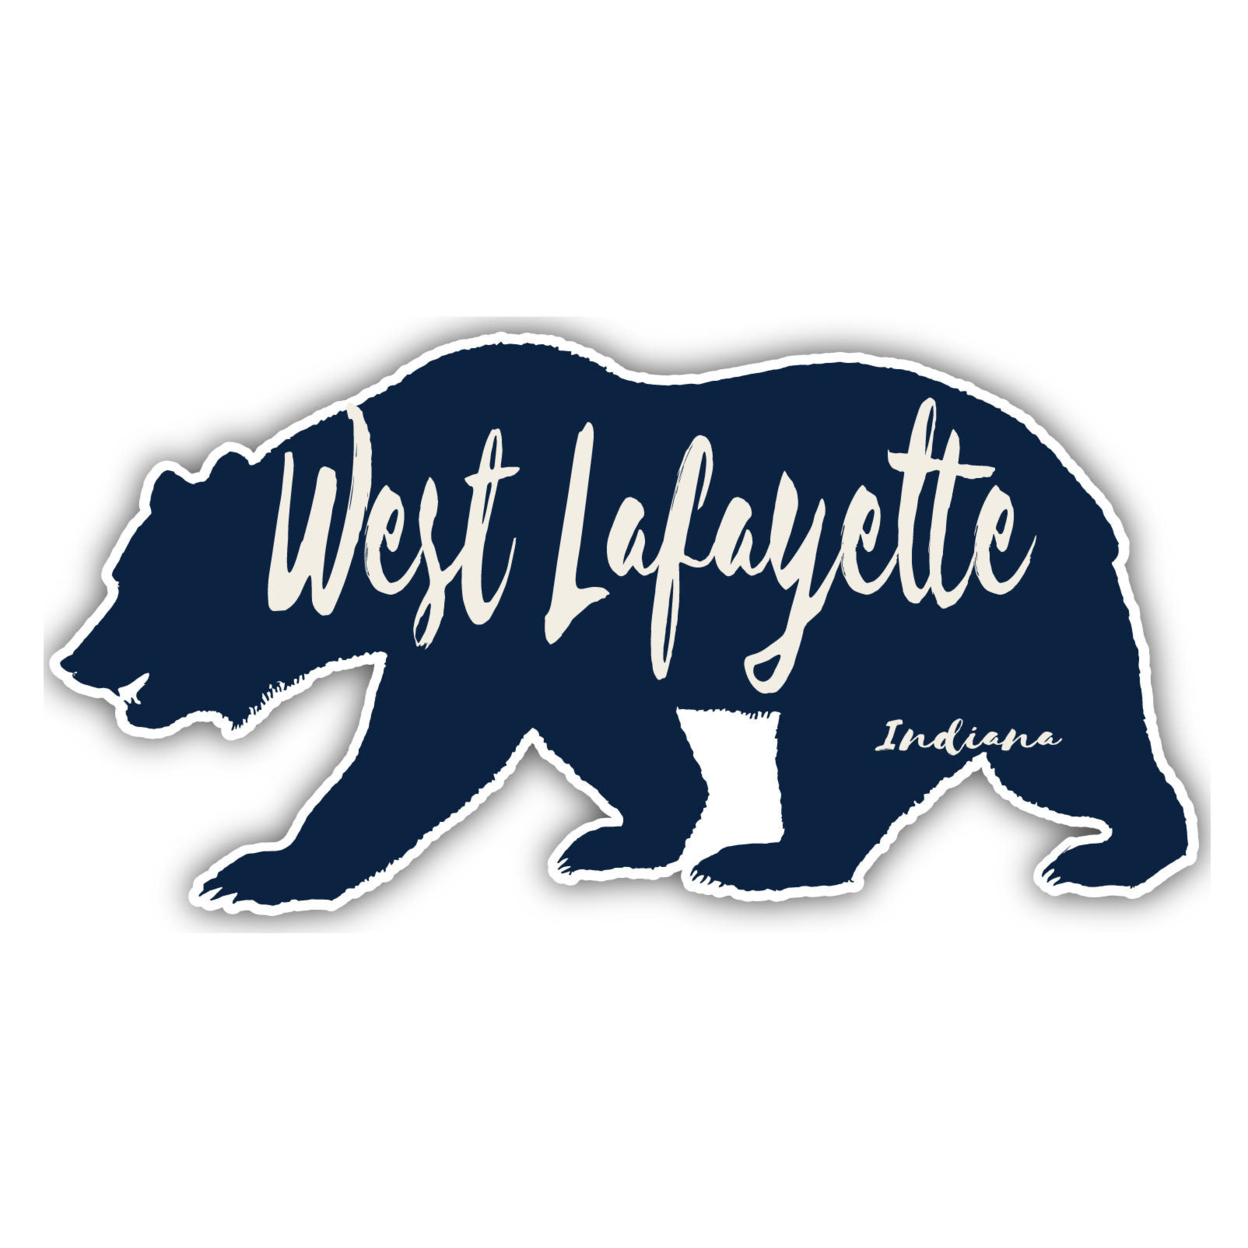 West Lafayette Indiana Souvenir Decorative Stickers (Choose Theme And Size) - Single Unit, 4-Inch, Great Outdoors